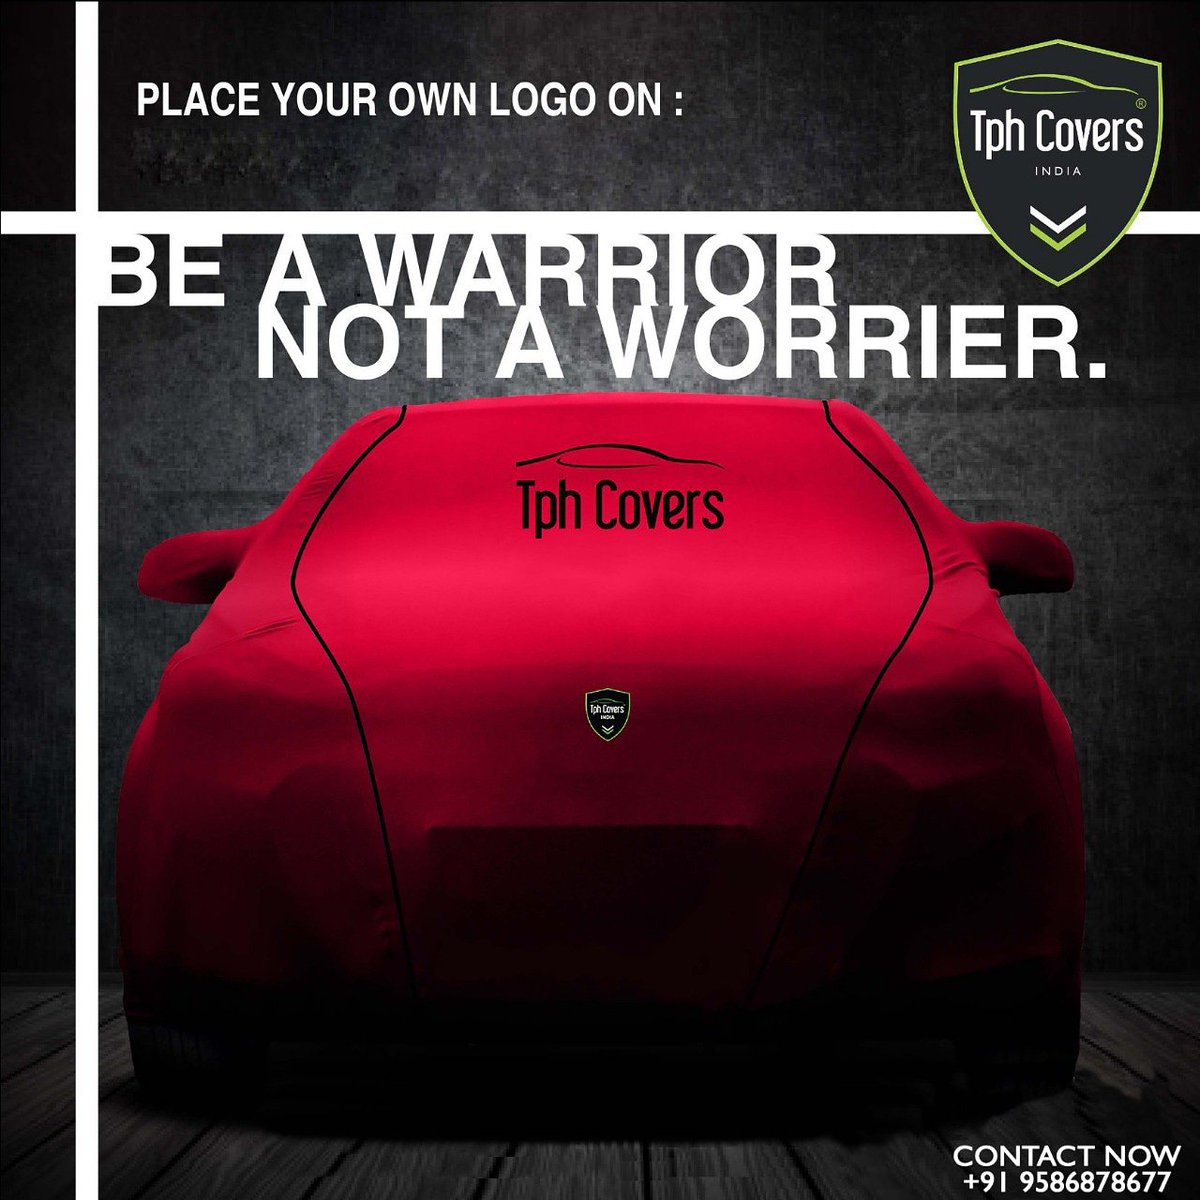 Looking for a strong #protection for your car? Visit tphcovers baroda and choose your style and we will give you the #best protection
#tphcovers #makeinindia #bike #carcovers #supercars #auto #carlifestyle #caristagram #car #durablecovers #cargram #carprotection #outdoor #indoor